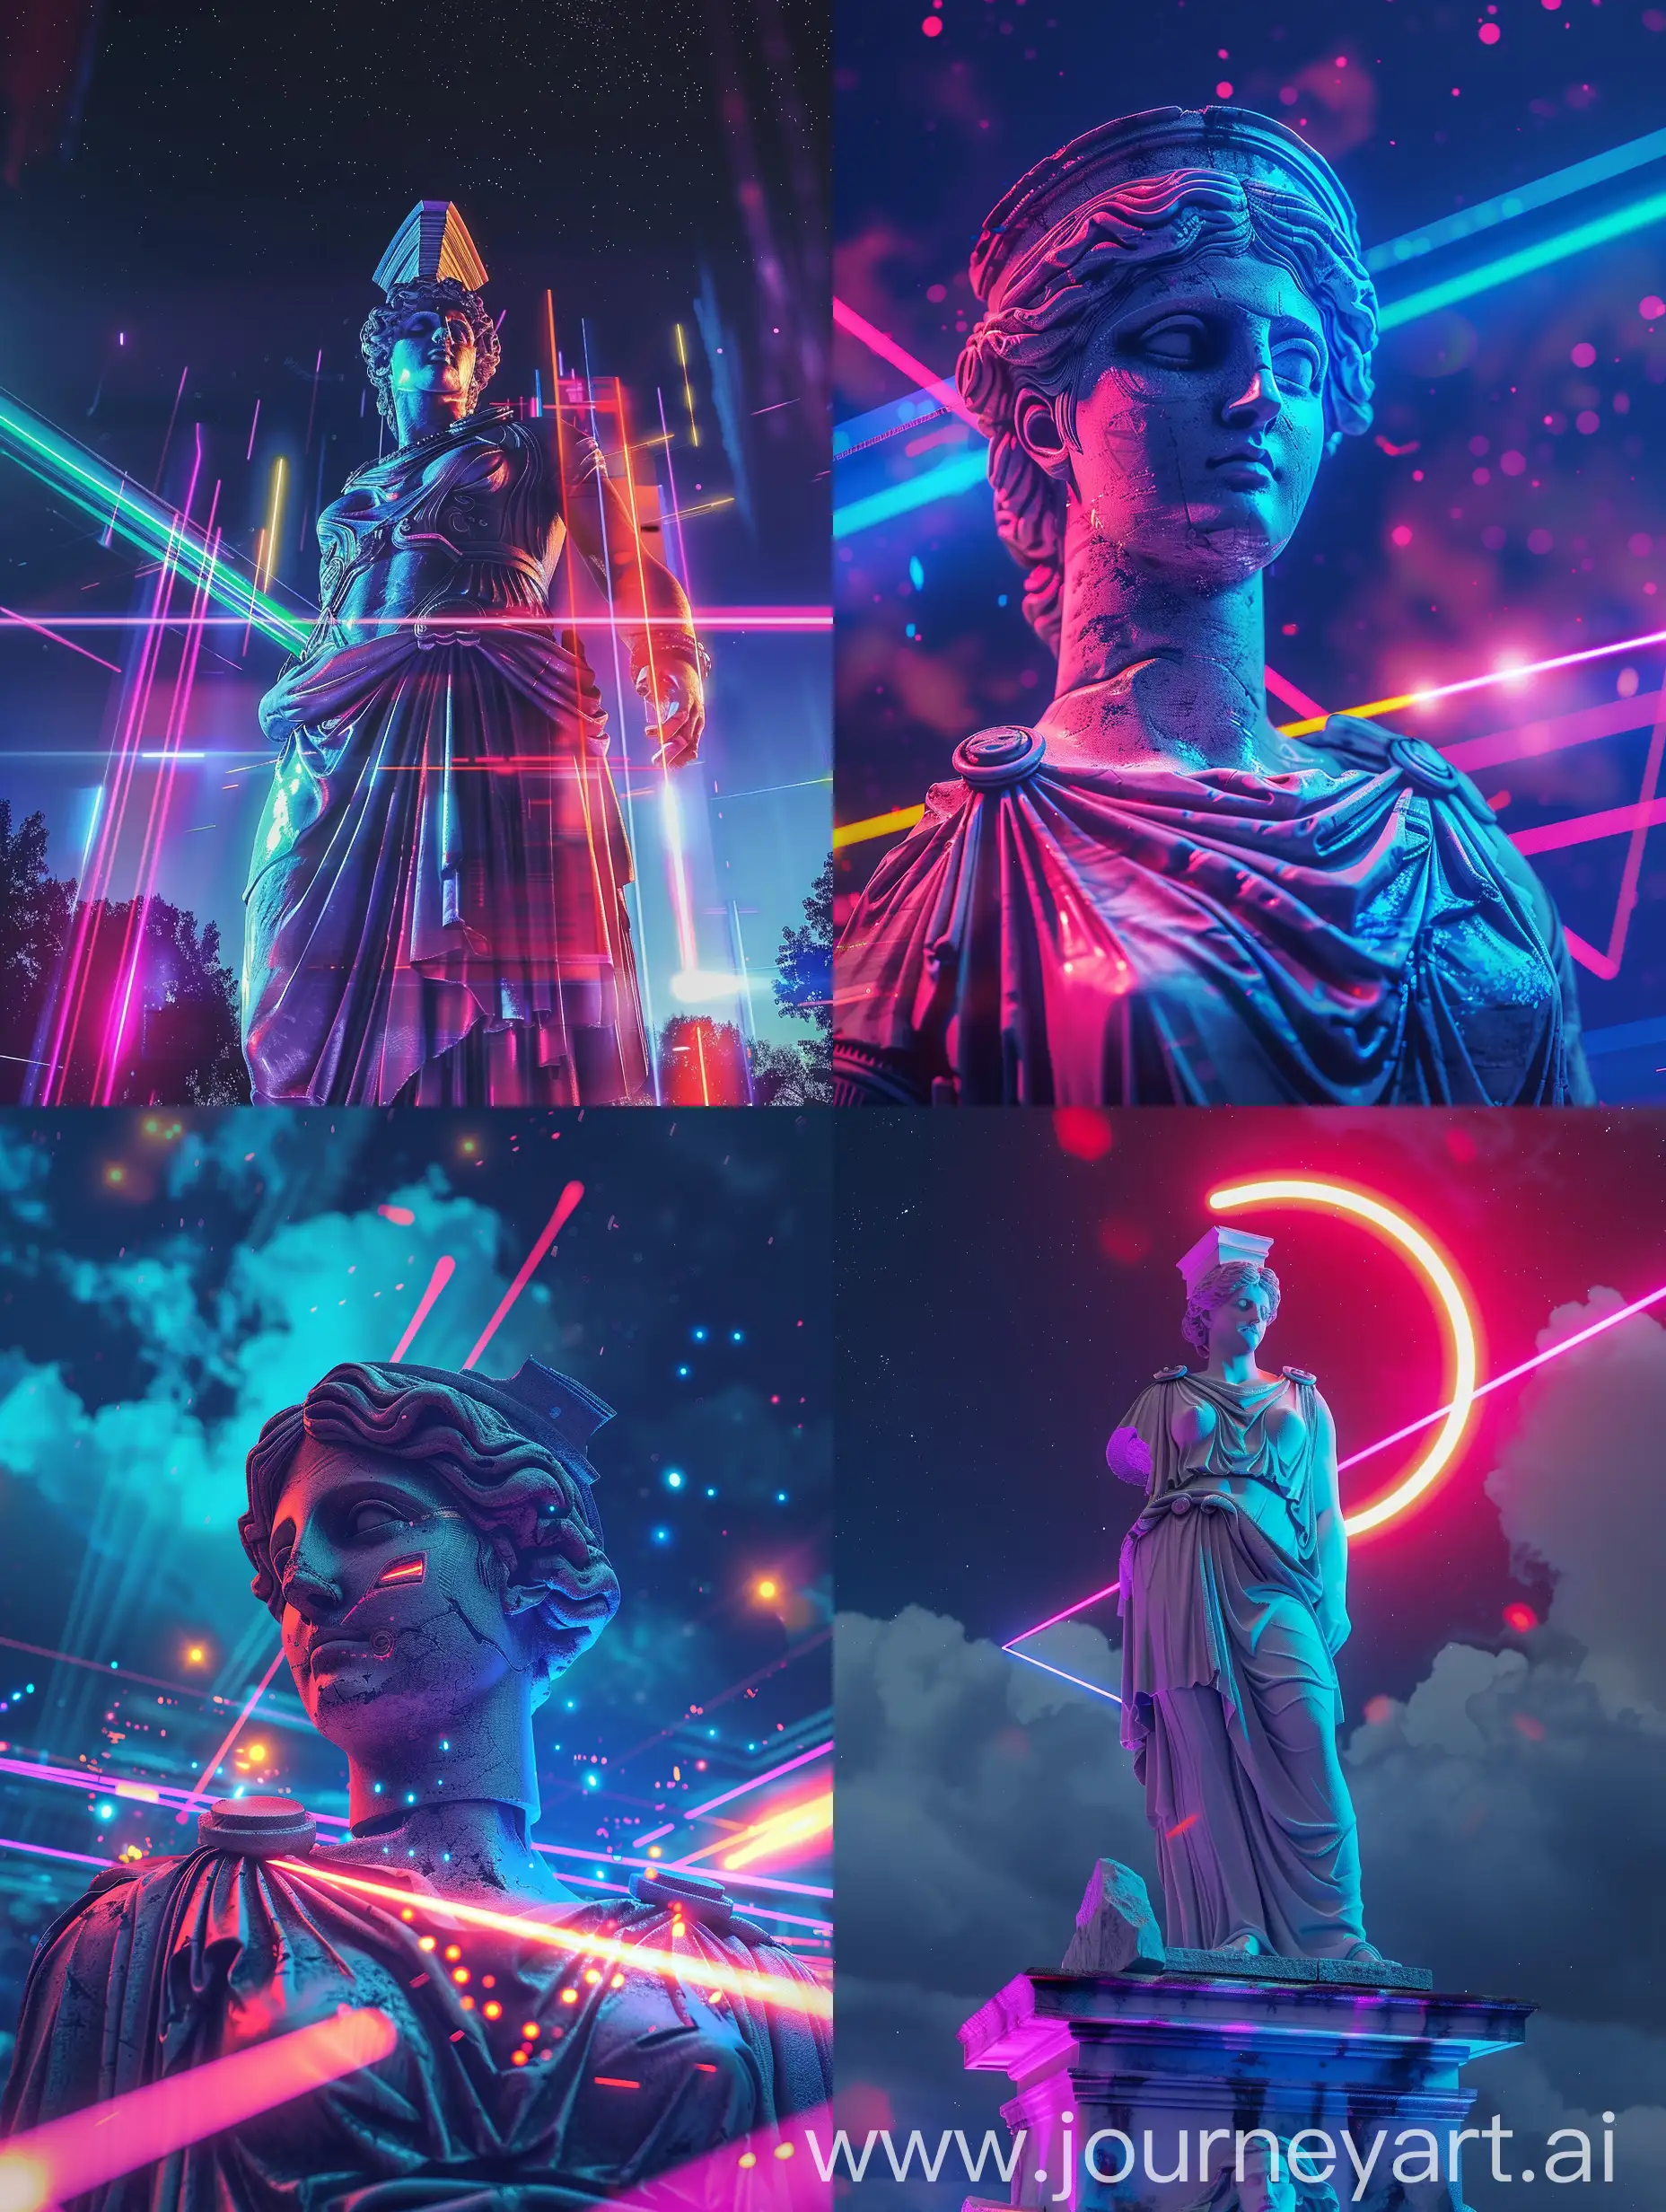 Cyberpunk synthwave Greek statue, against a night sky, with science fiction colorful light effects
